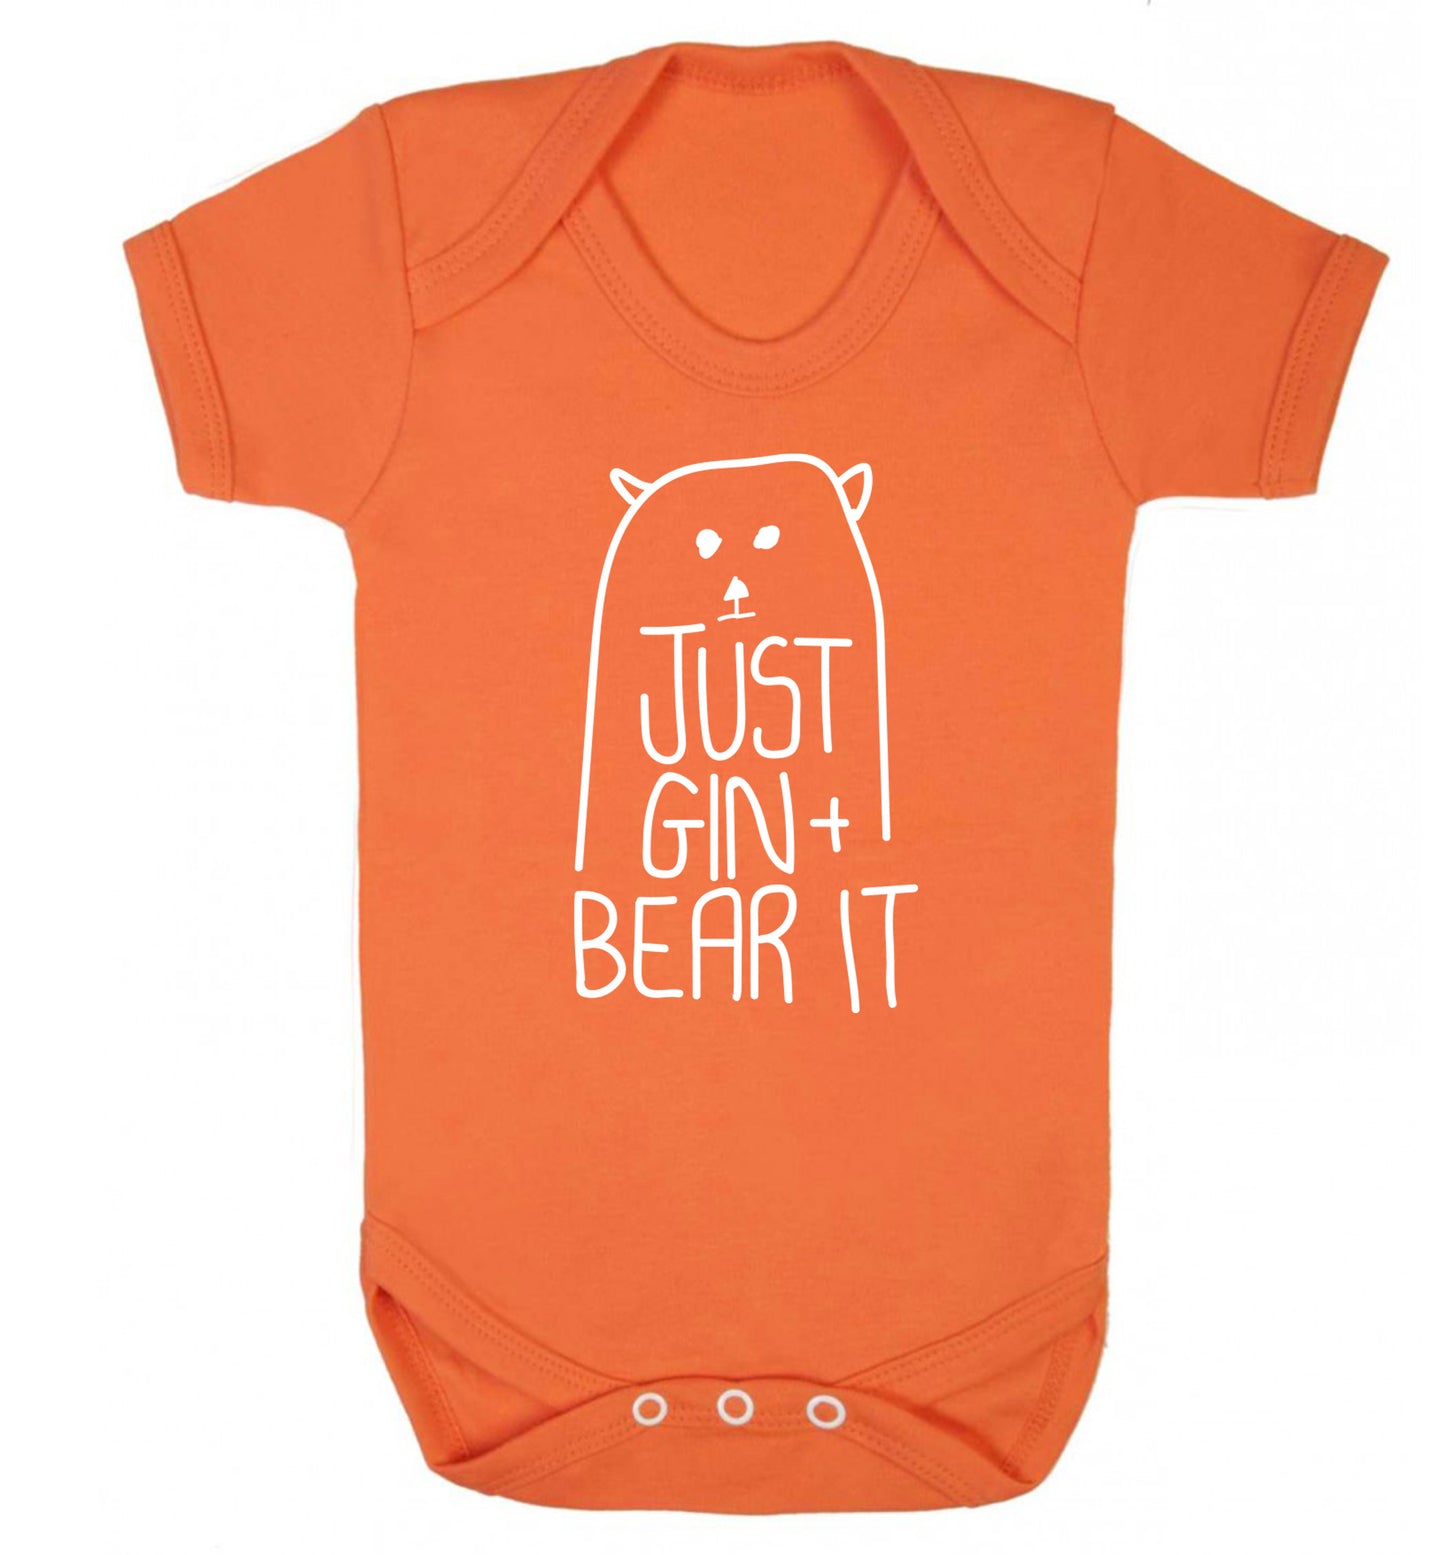 Just gin and bear it Baby Vest orange 18-24 months